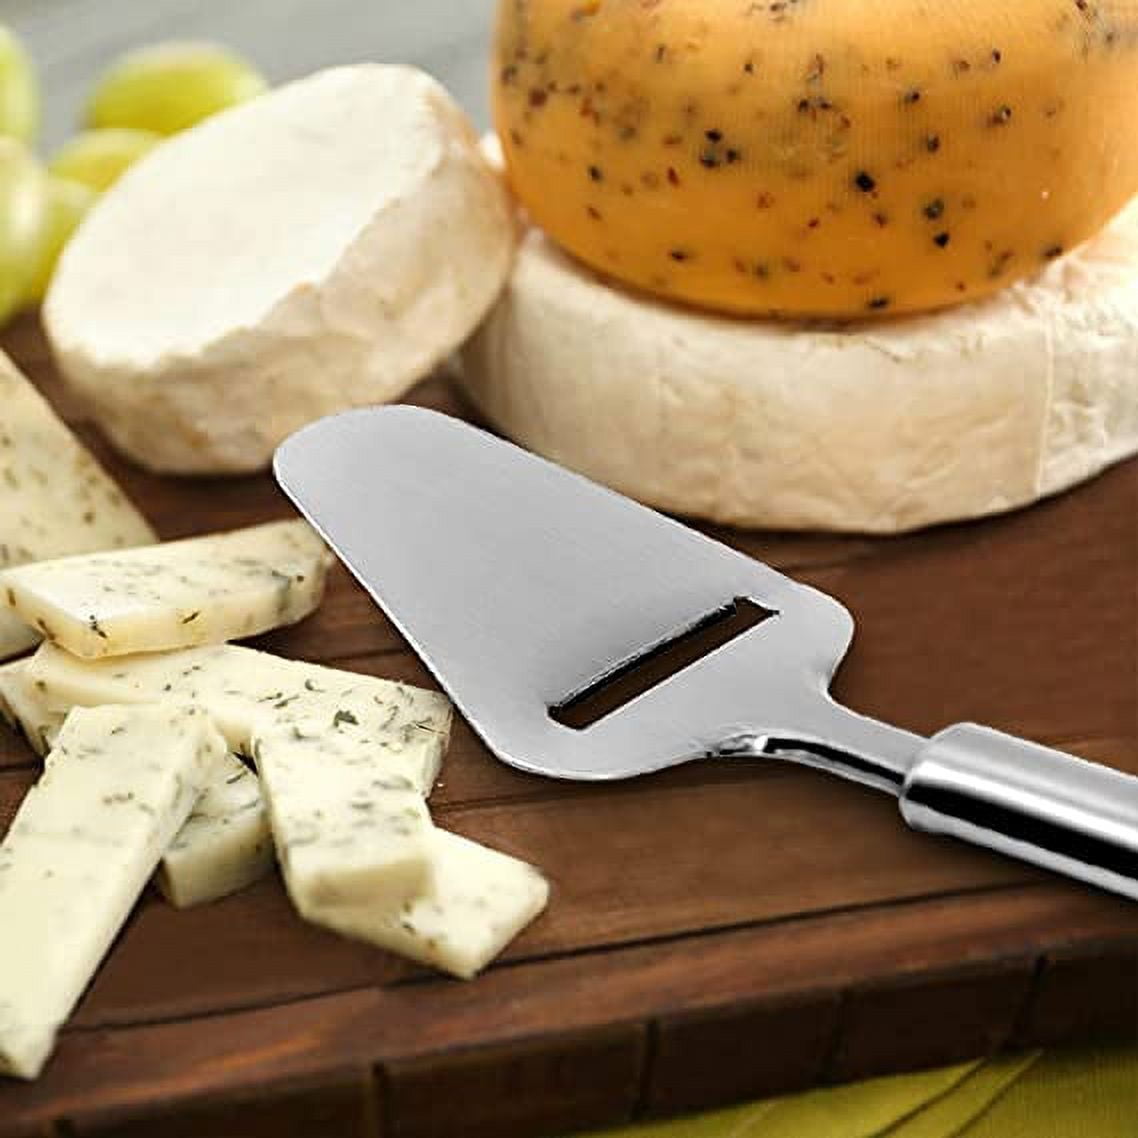 Cheese Cutter Linear Stainless Steel Butter Cheese Slicer for Cutting Soft,  Semi-hard and Hard Cheese Kitchen Cooking Tools